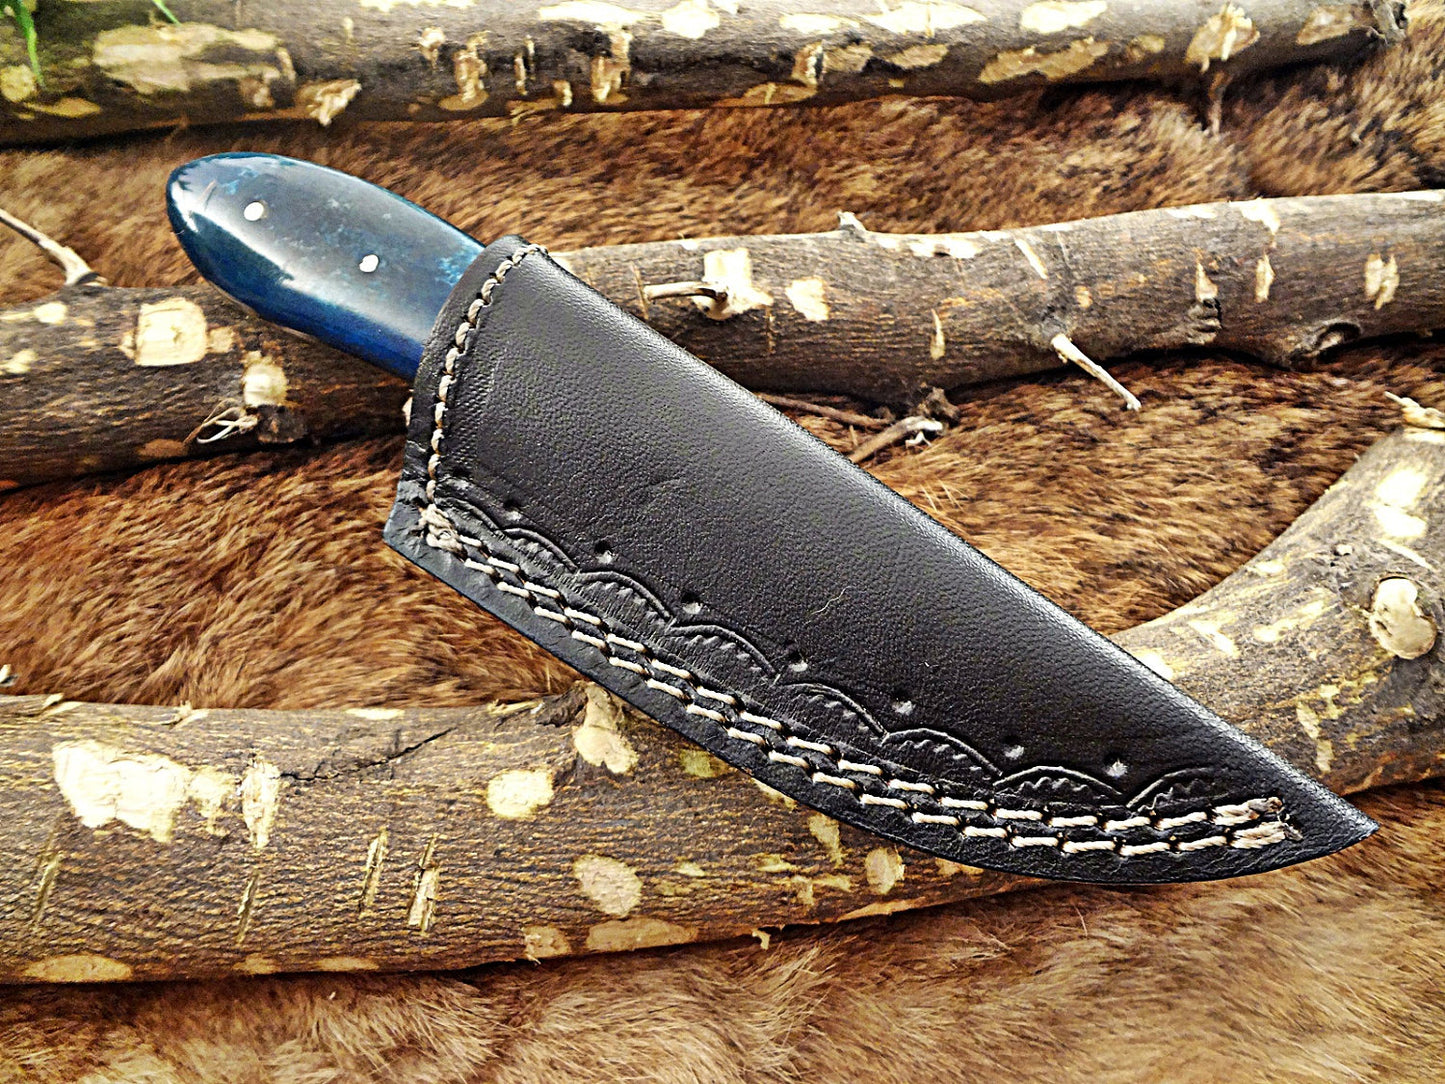 6.5" Long compact pocket Knife, full tang Damascus steel 3" drop point blade, Available in Blue and white scales, Cow hide Leather sheath included